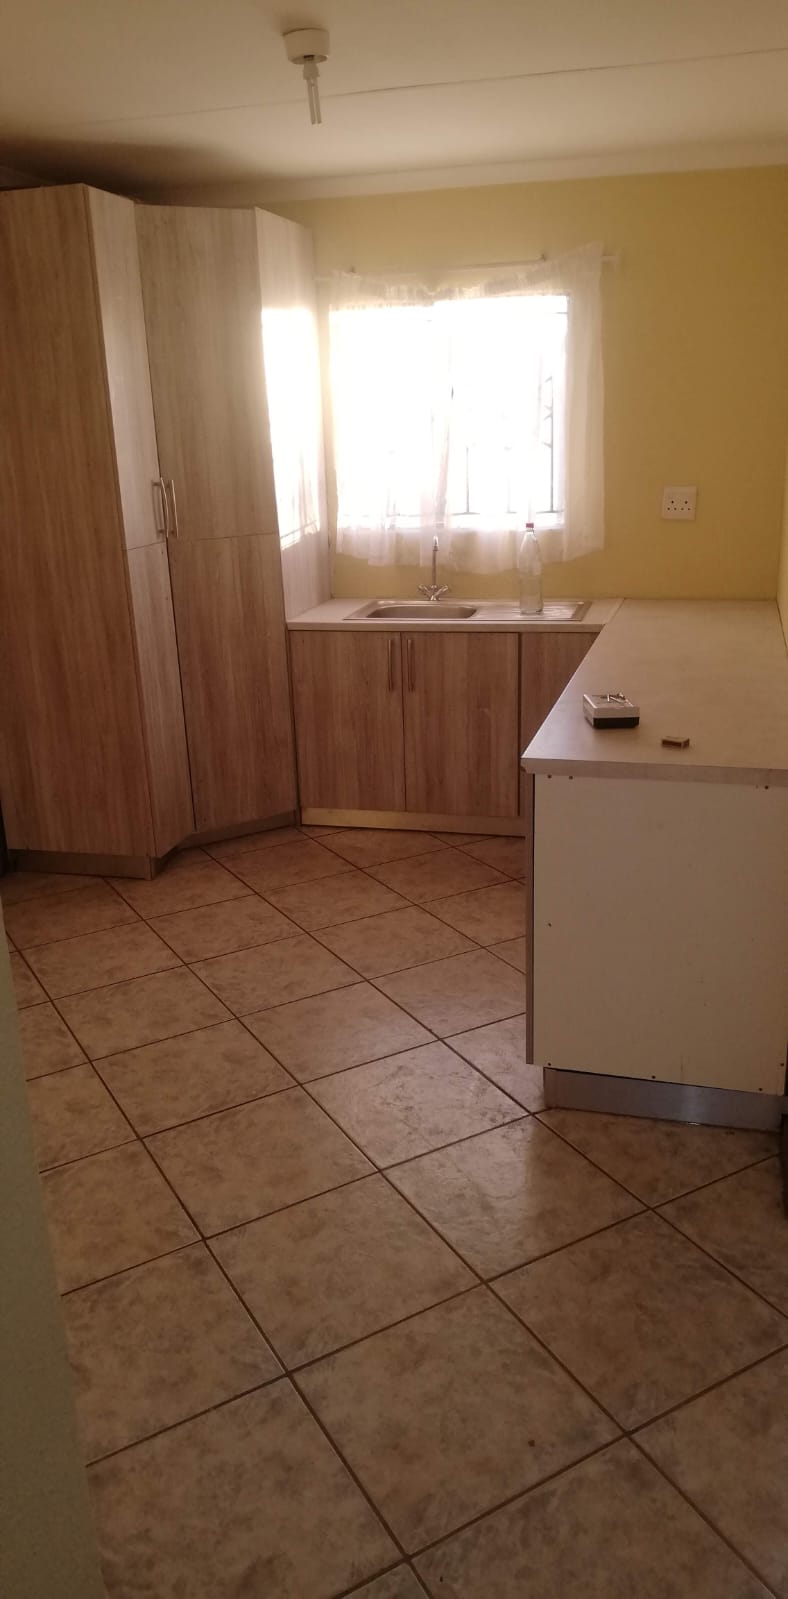 Room for rent in Birch Acres Gauteng. Listed by PropertyCentral